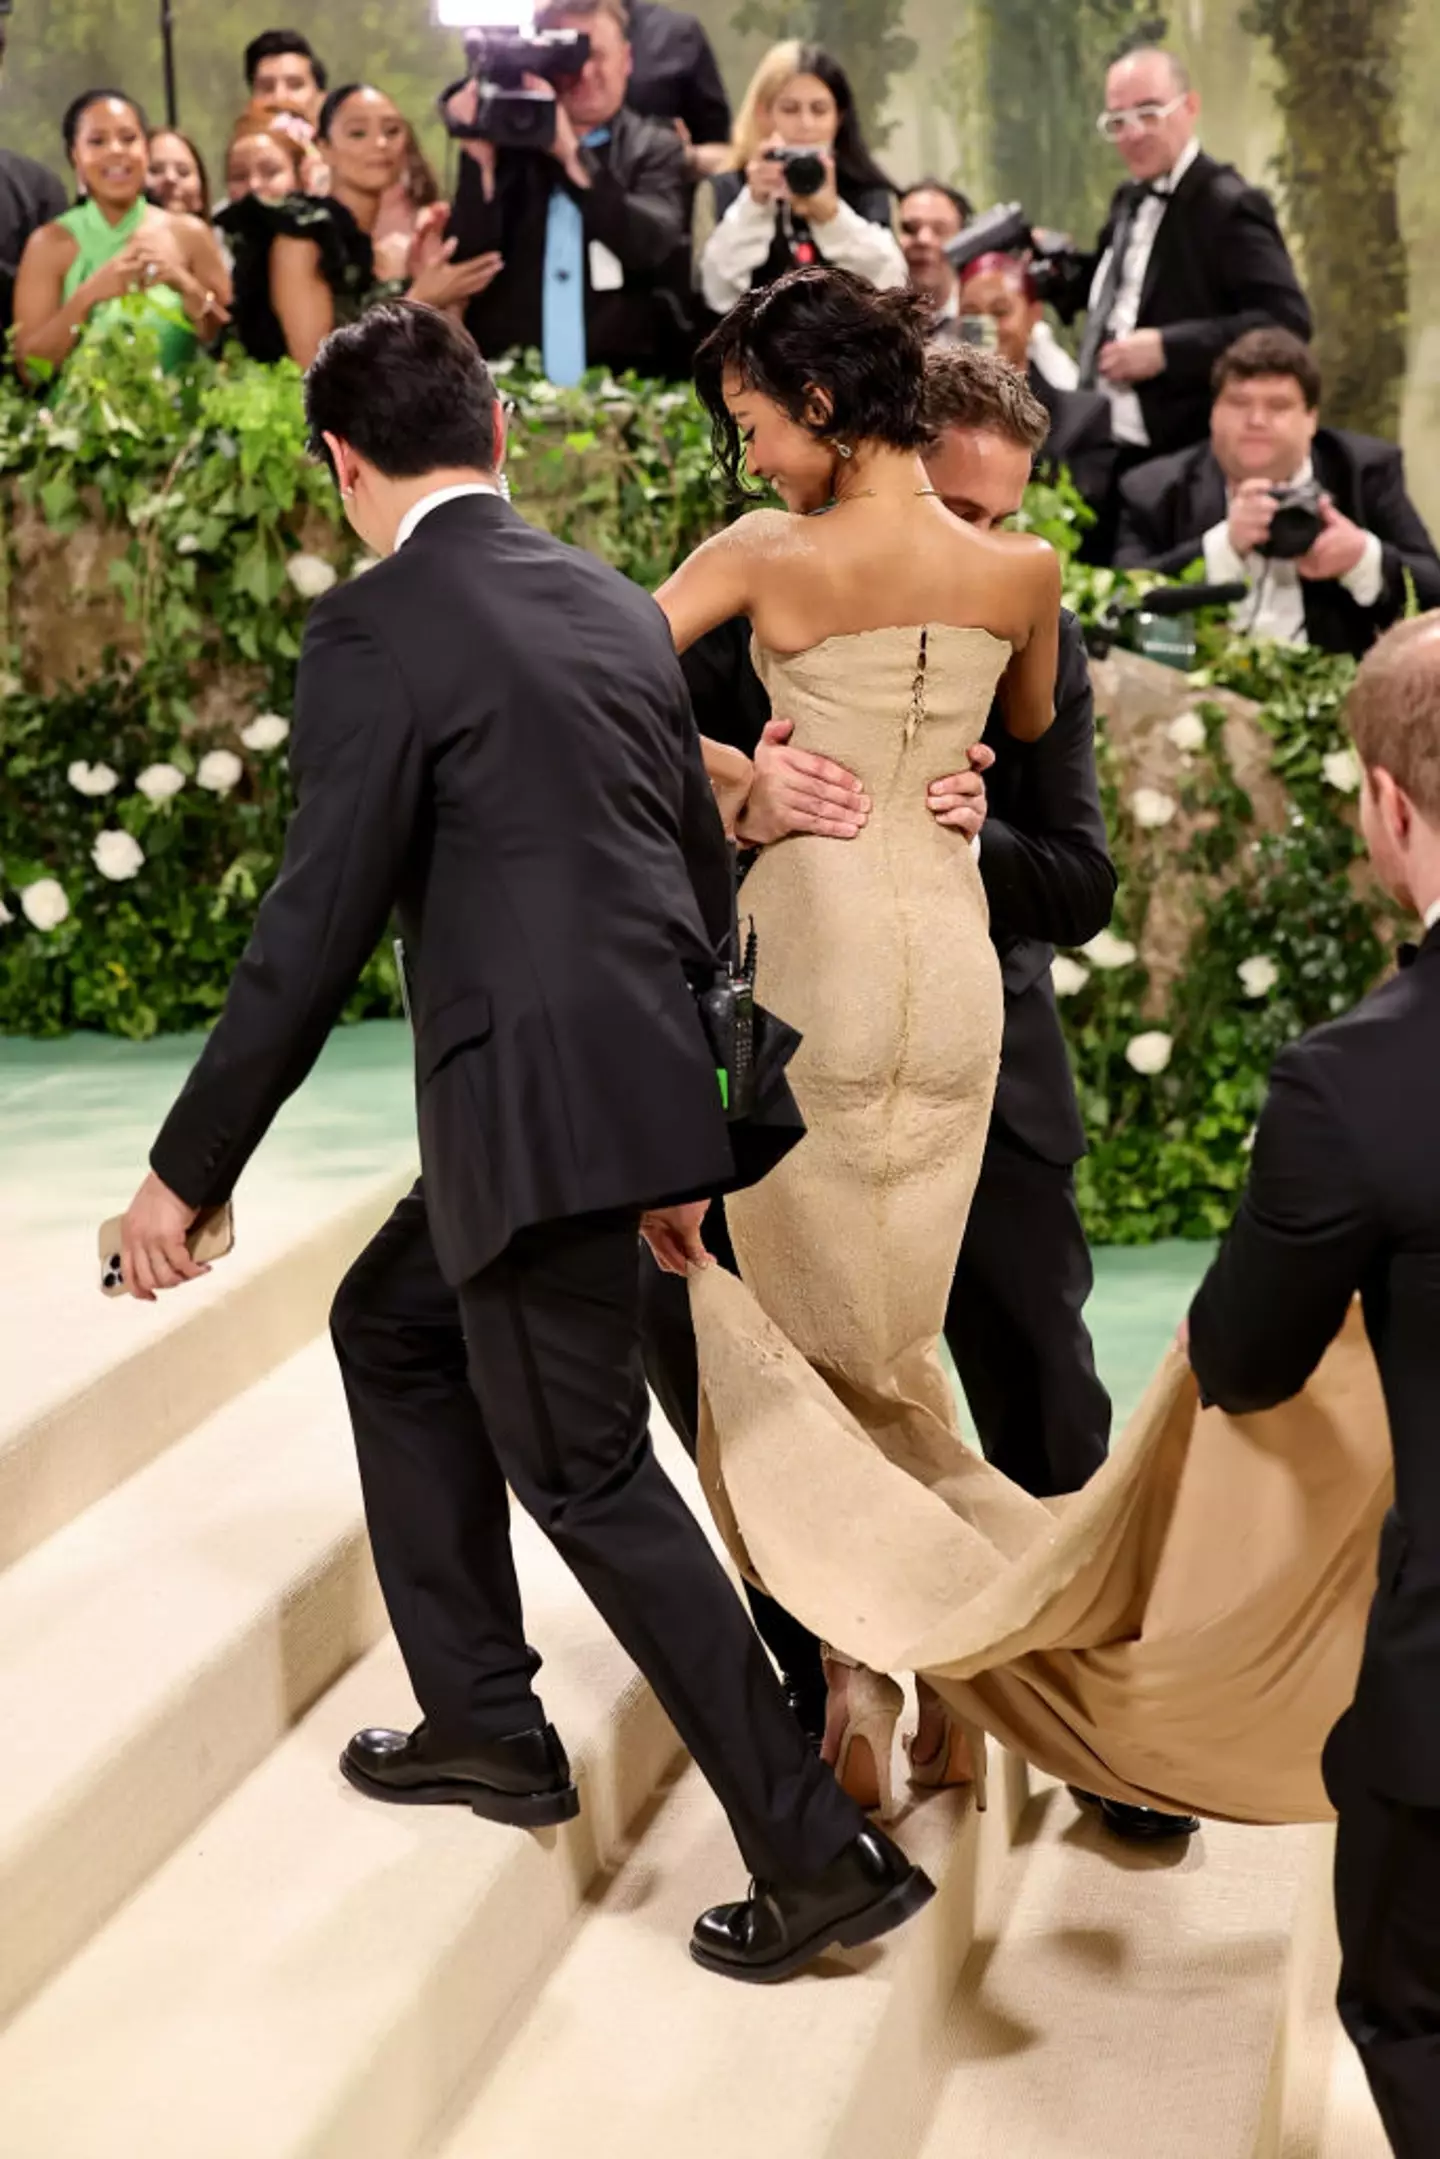 Tyla had to be carried up the steps. (Theo Wargo/GA/The Hollywood Reporter via Getty Images)